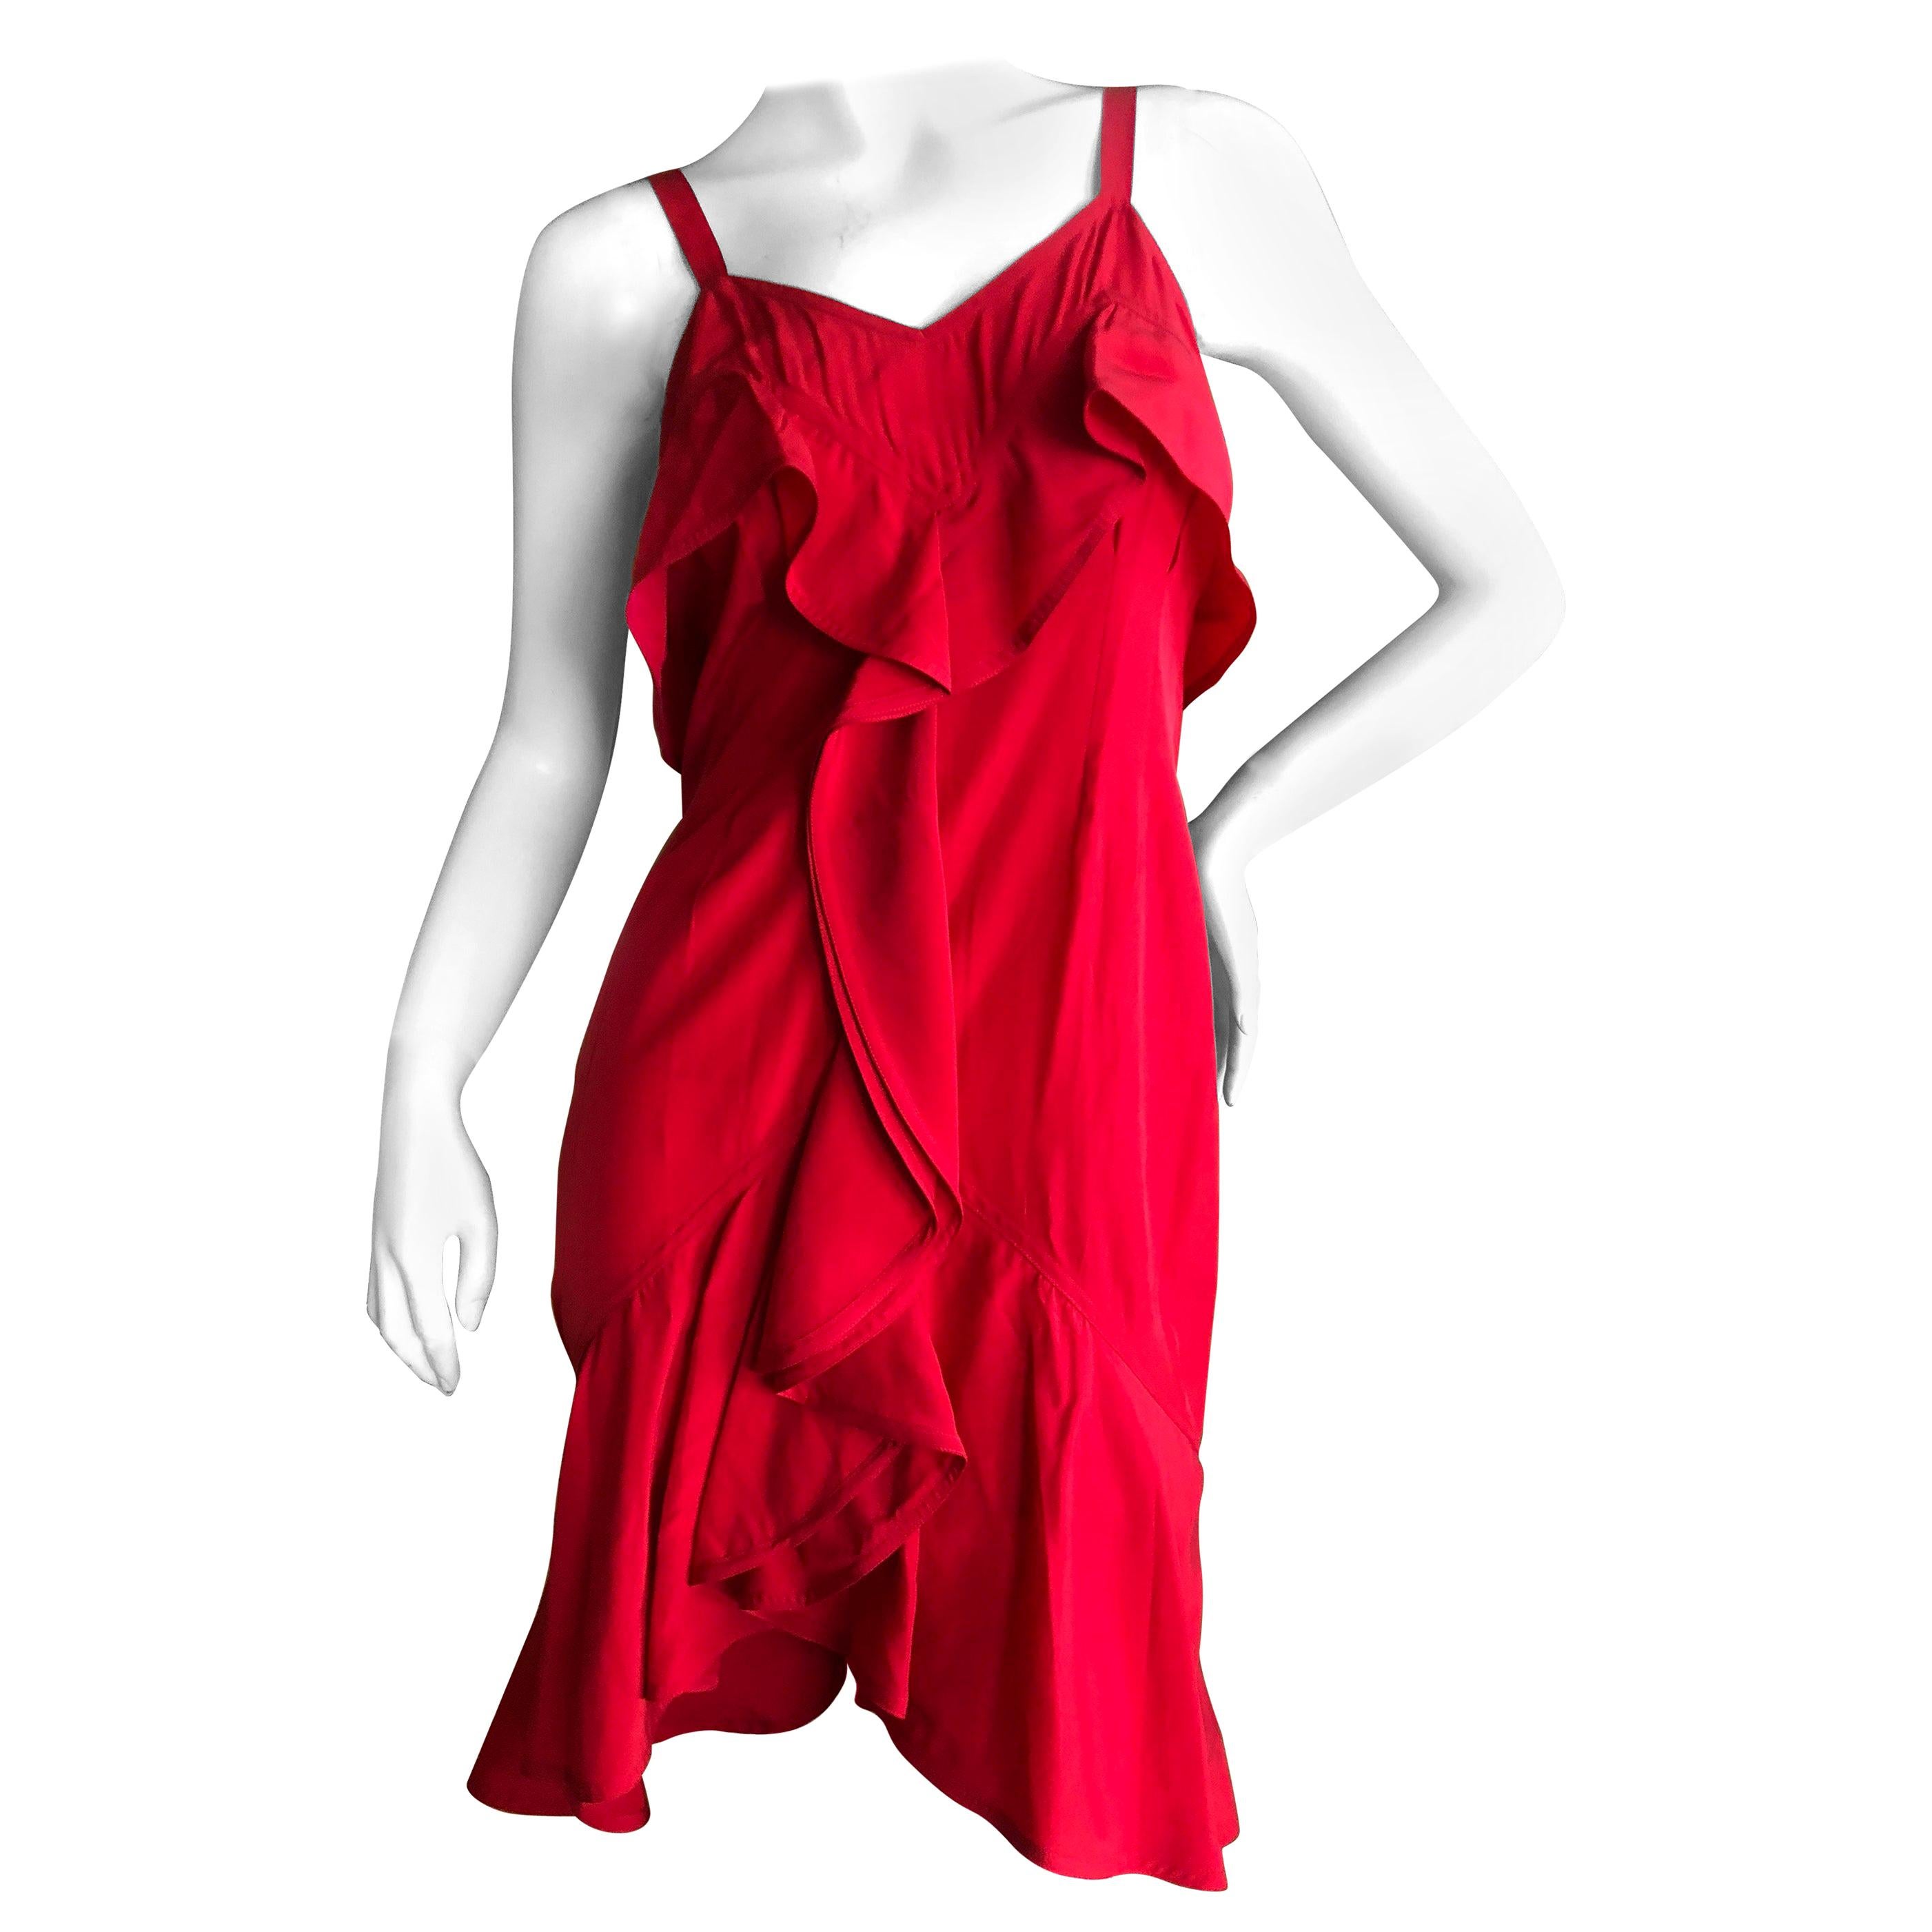 Yves Saint Laurent Tom Ford Fall 2003 Look 1 Red Ruffle Silk Dress For Sale